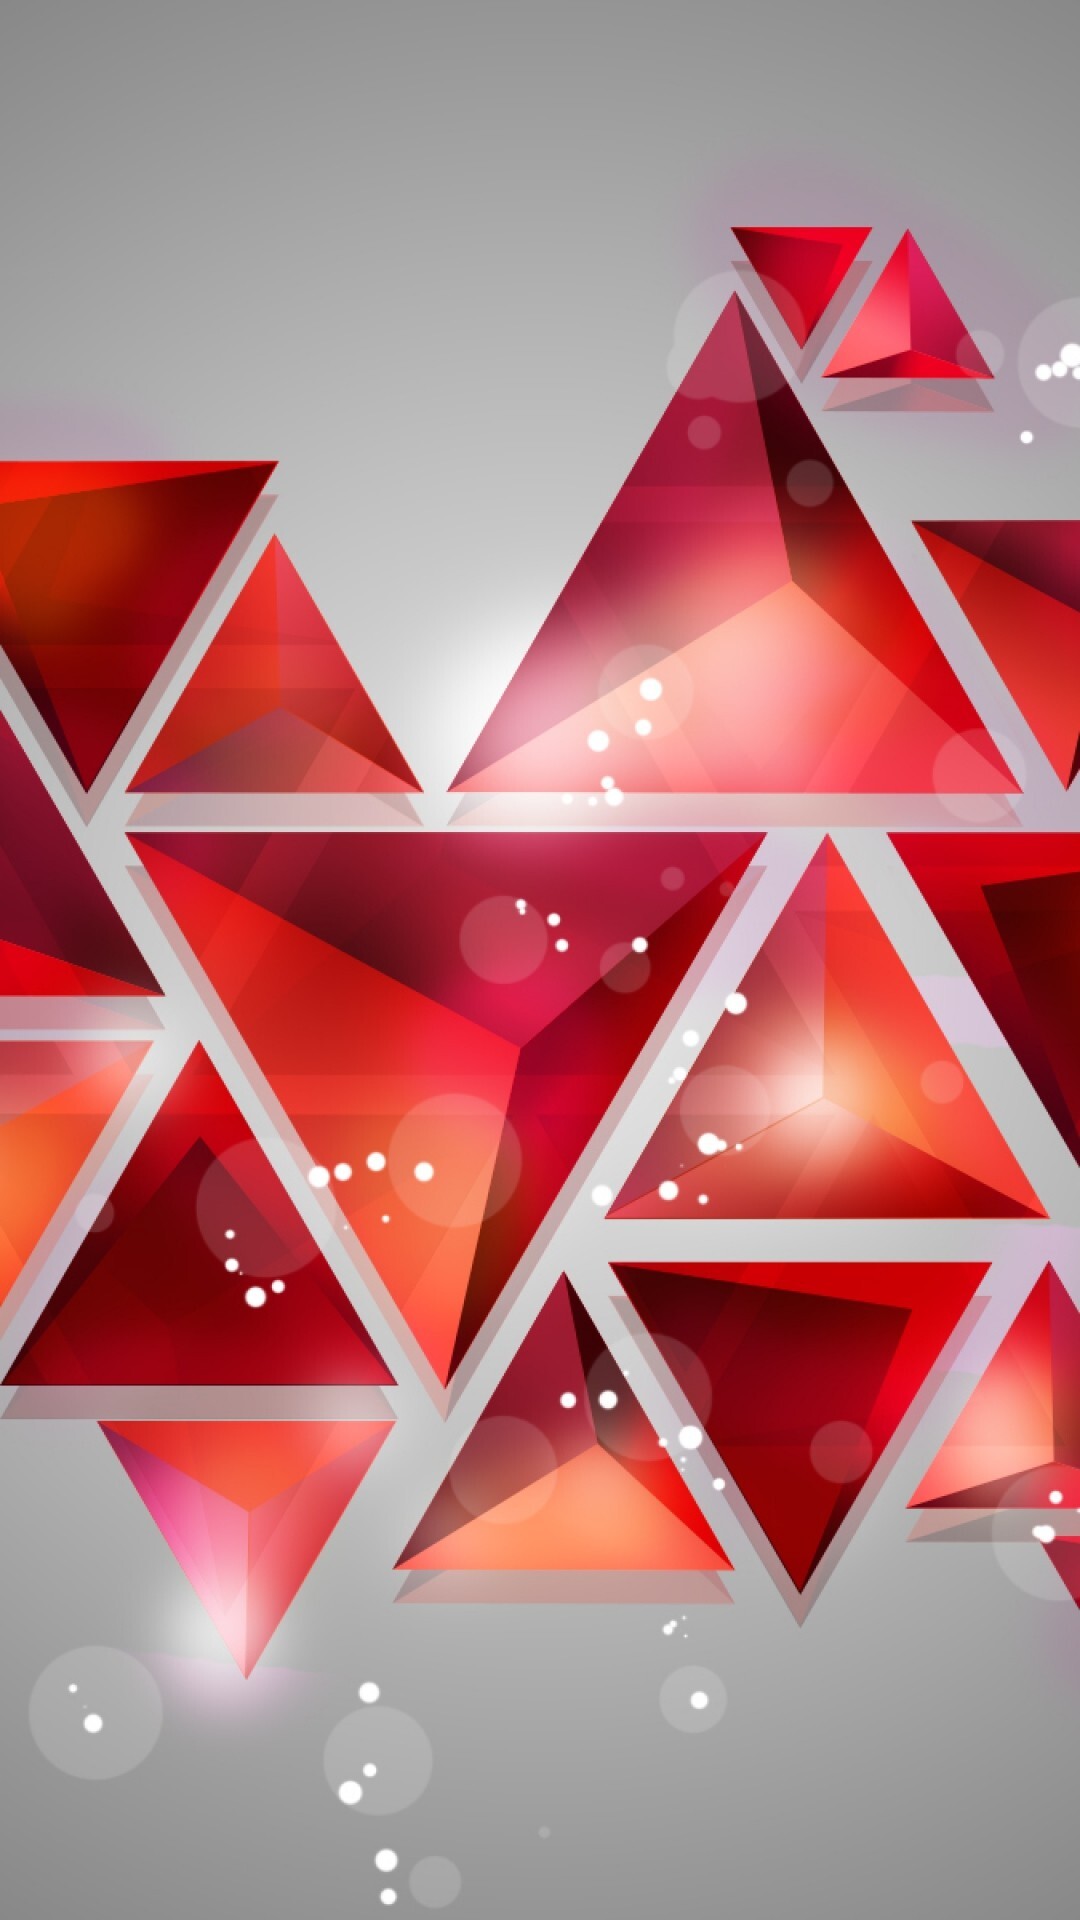 Geometry: Red triangles, Pyramids, Edges, Shining lights. 1080x1920 Full HD Background.